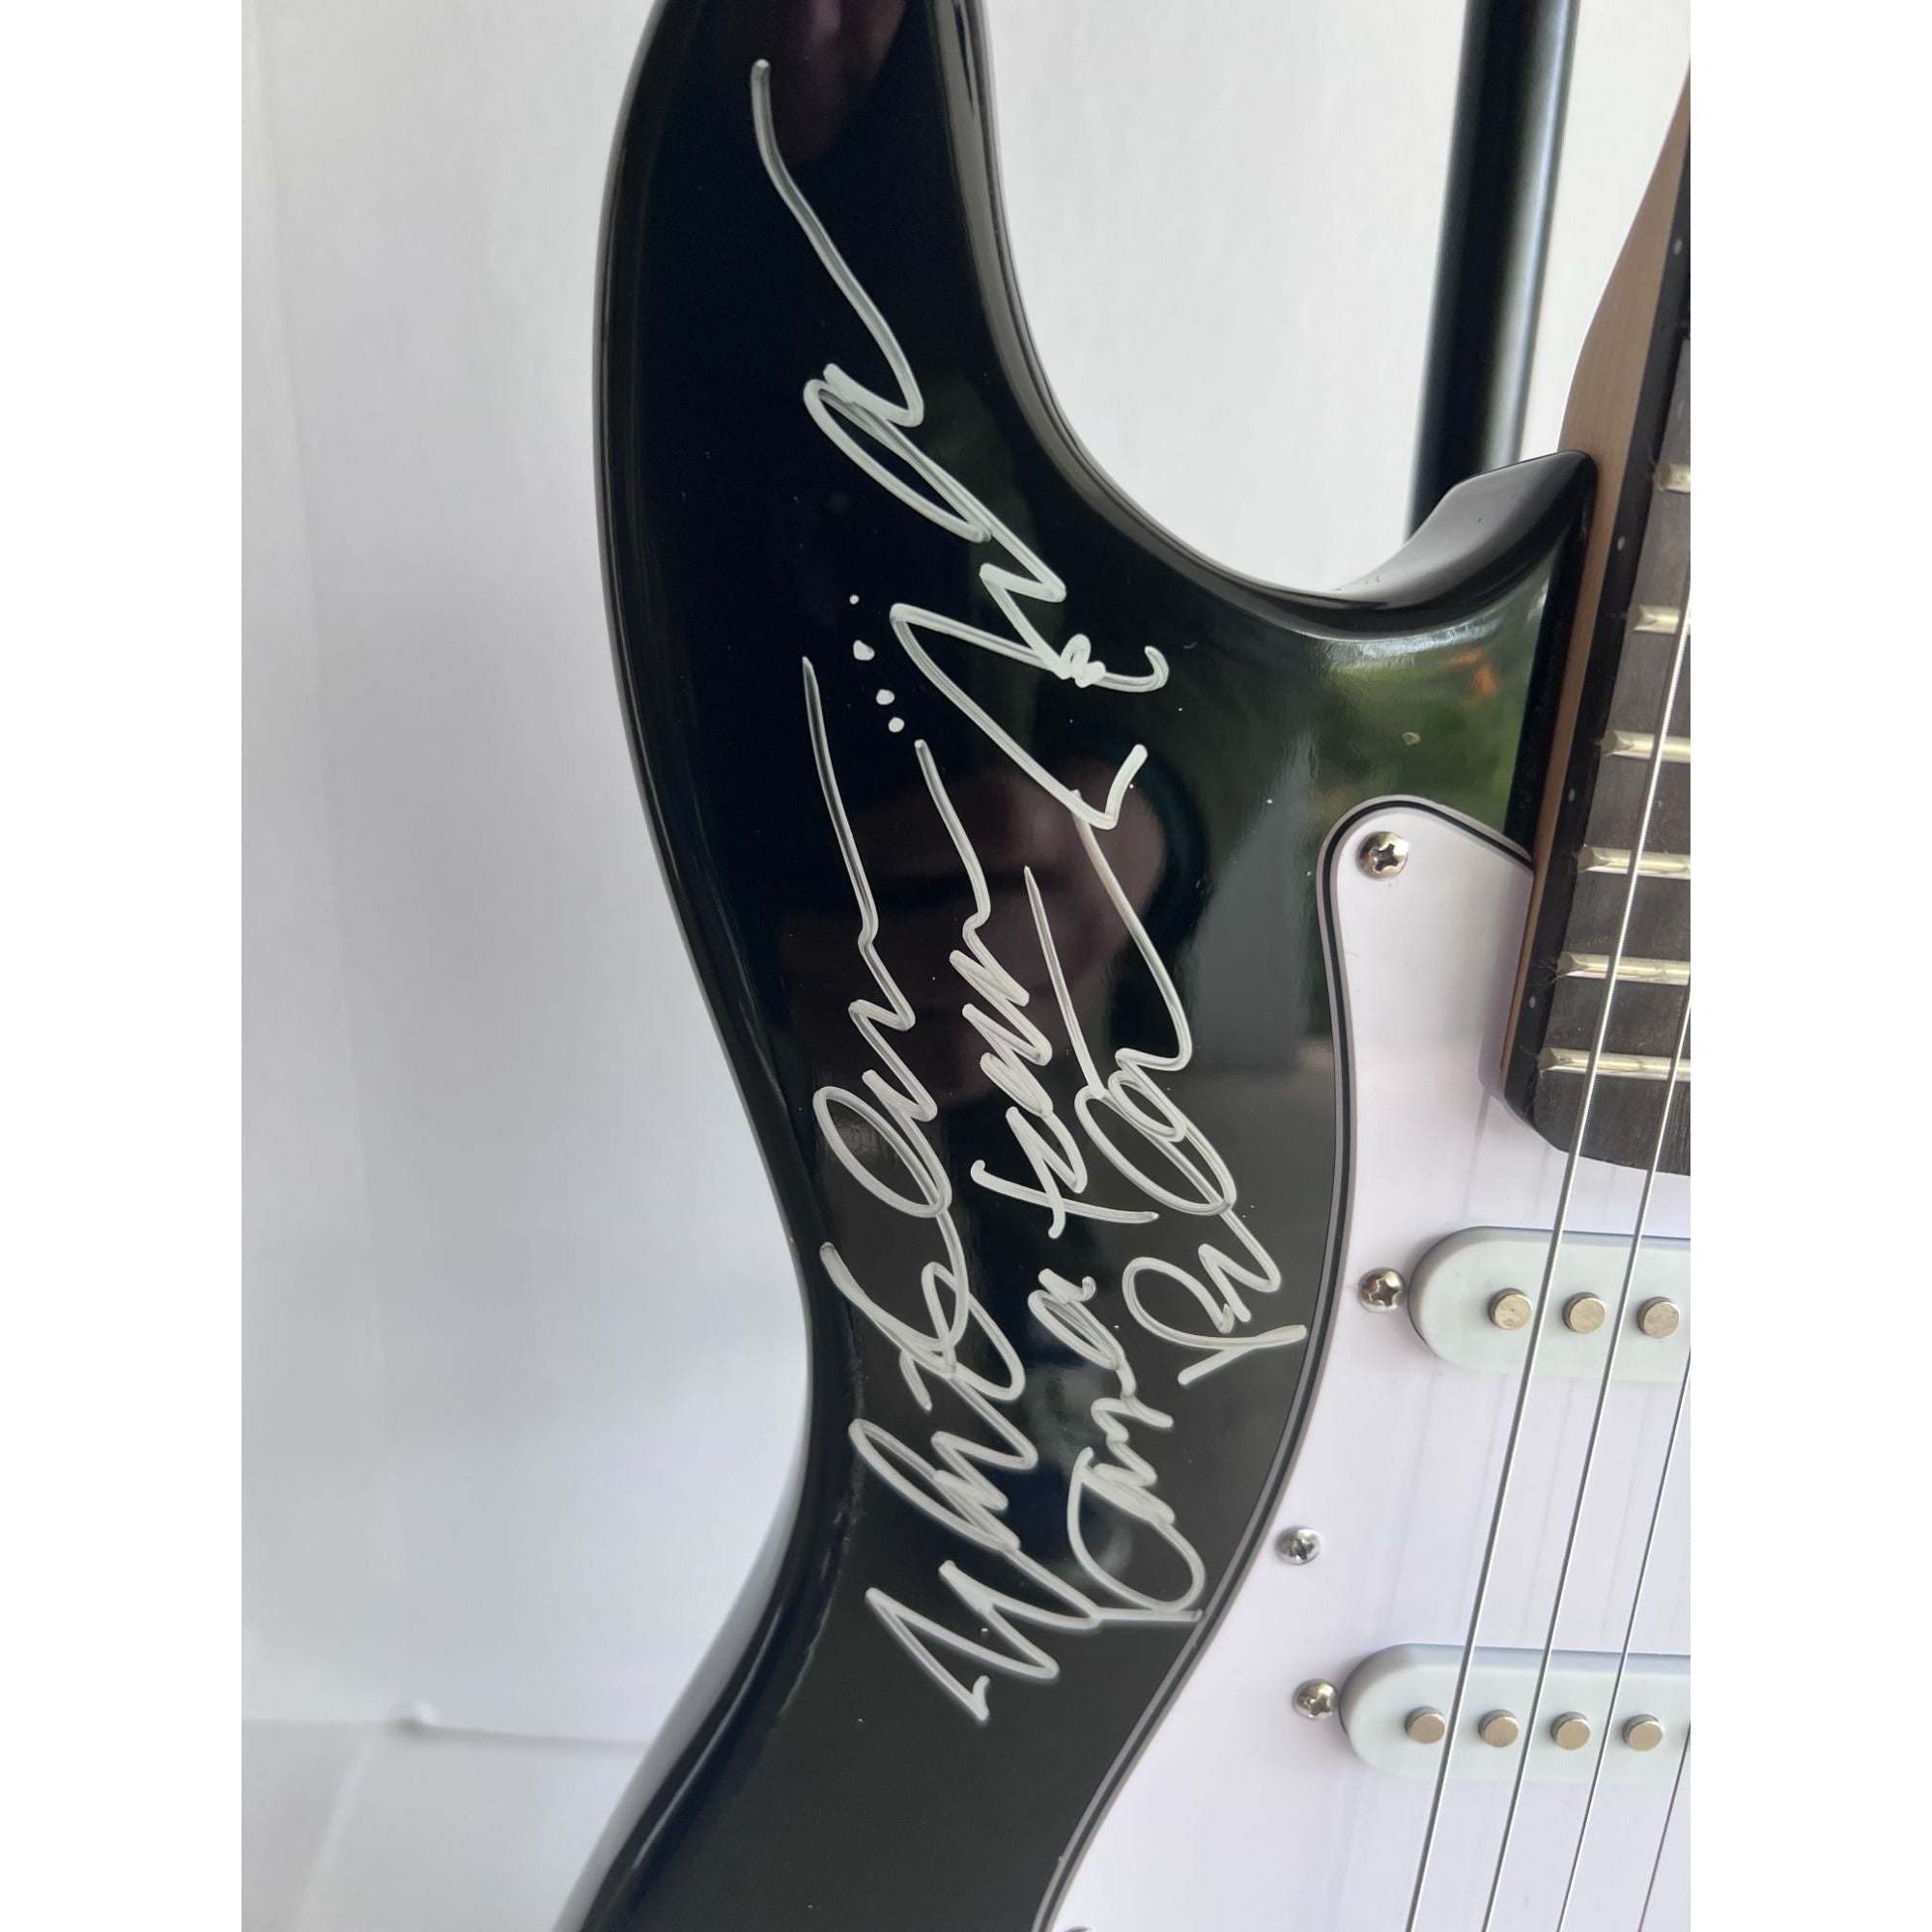 The Monkees Michael Nesmith, Peter Tork, Micky Dolenz, and Davey Jones full size Stratocaster electric guitar signed with proof